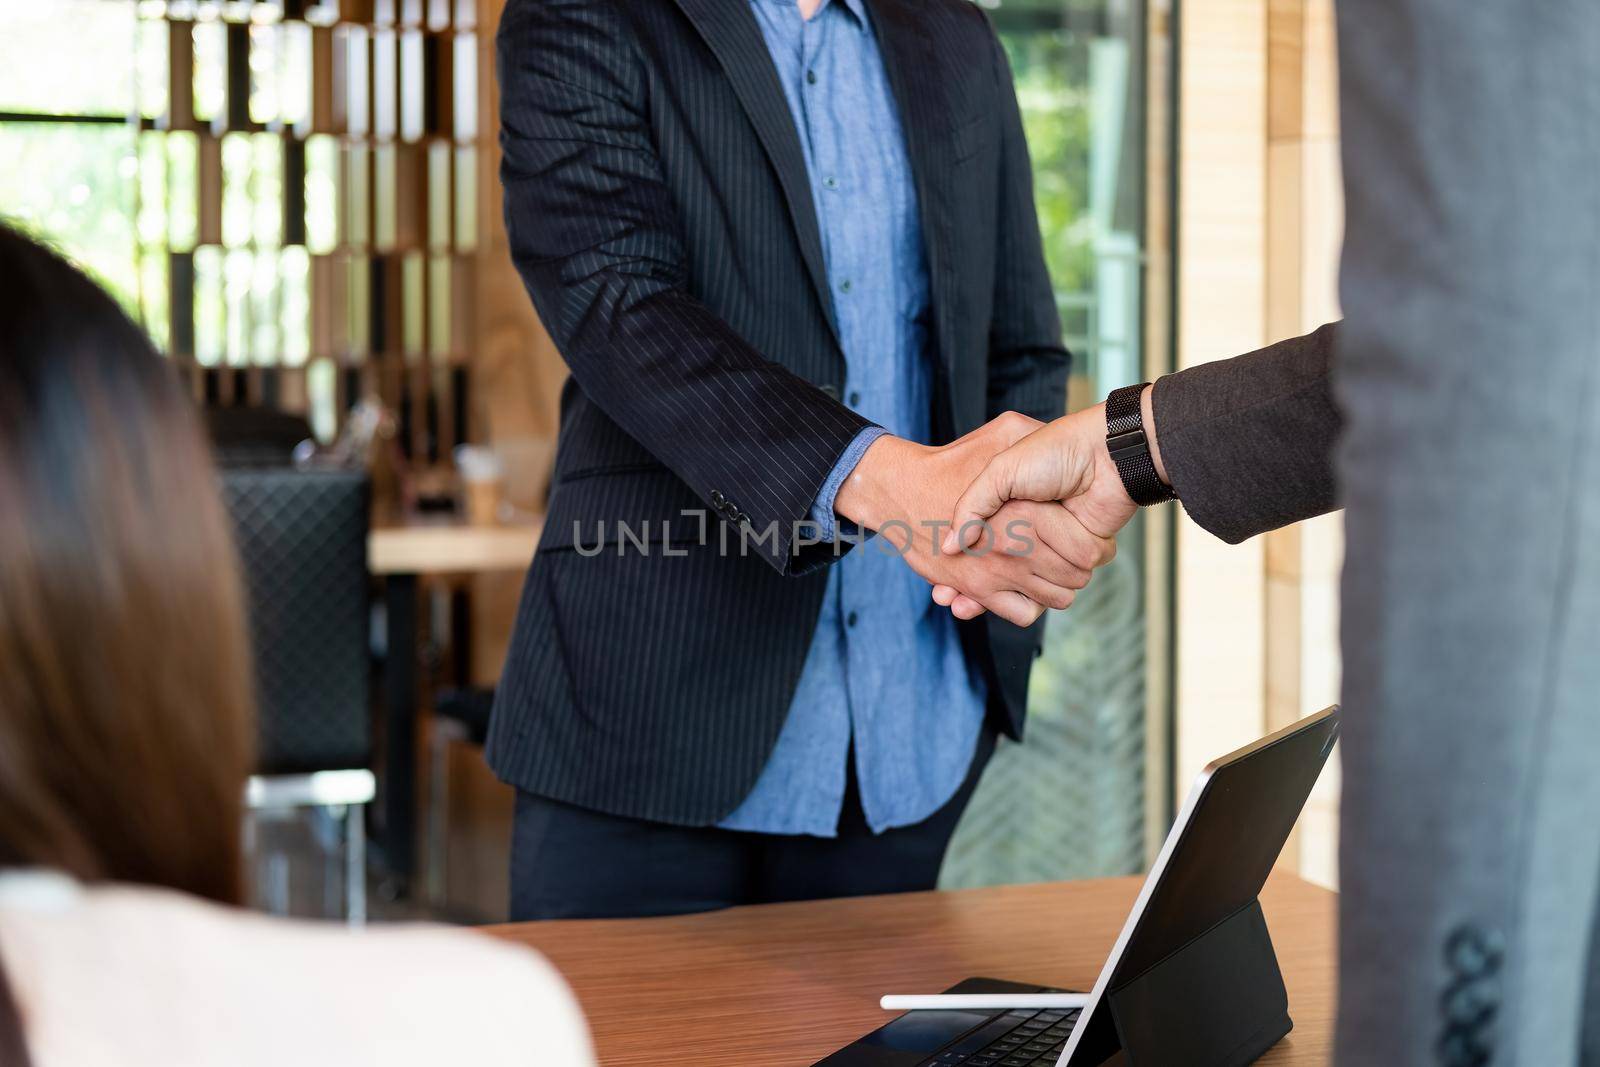 Business people shaking hands during meeting in meeting room.